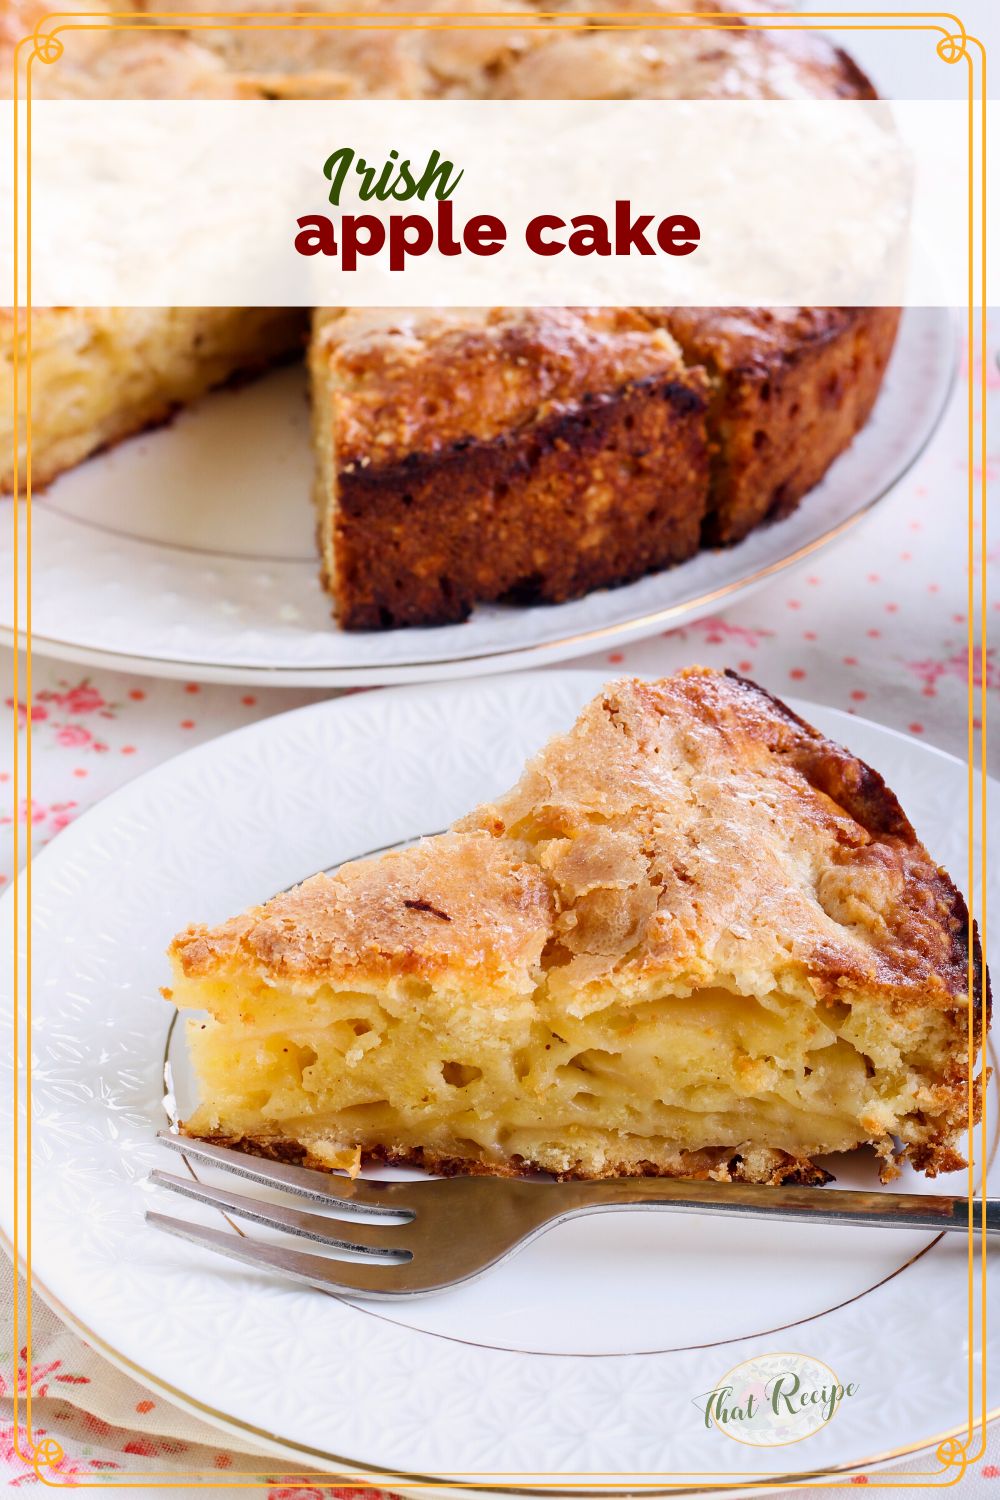 slice of apple cake on a plate with text overlay "Irish Apple Cake